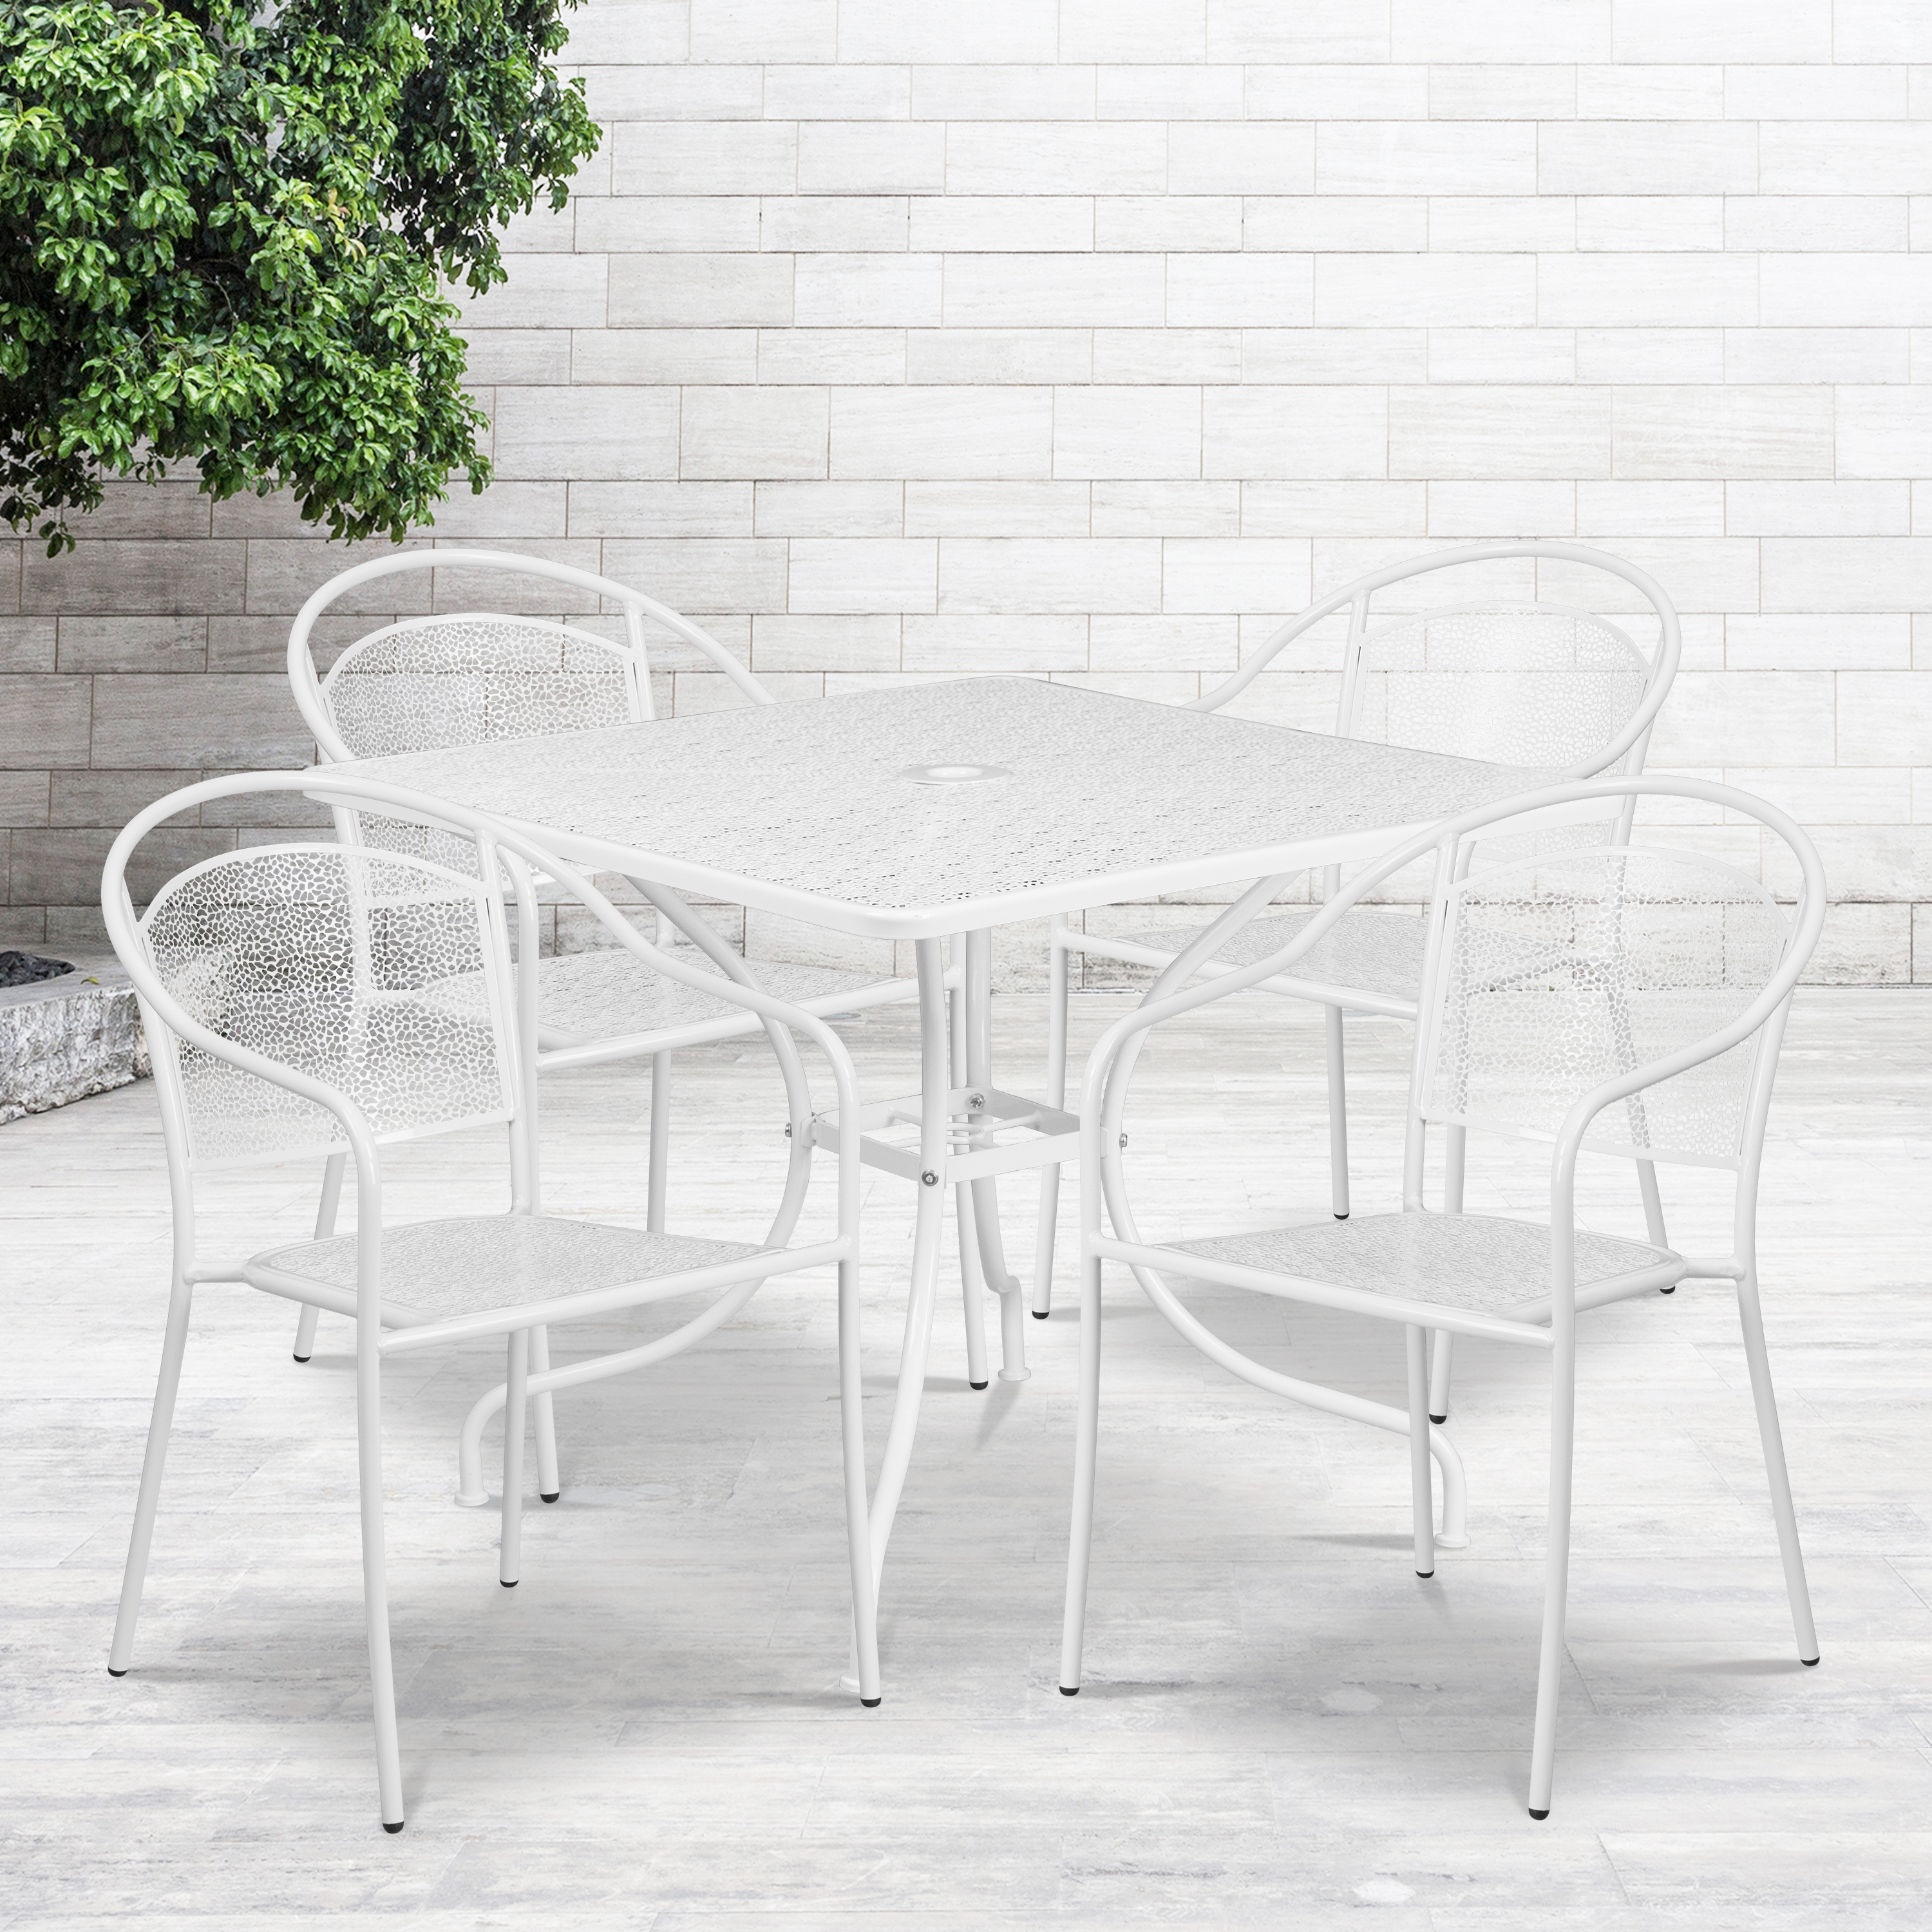 Flash Furniture Commercial Grade 35.5" Square White Indoor-Outdoor Steel Patio Table Set with 4 Round Back Chairs - image 1 of 5